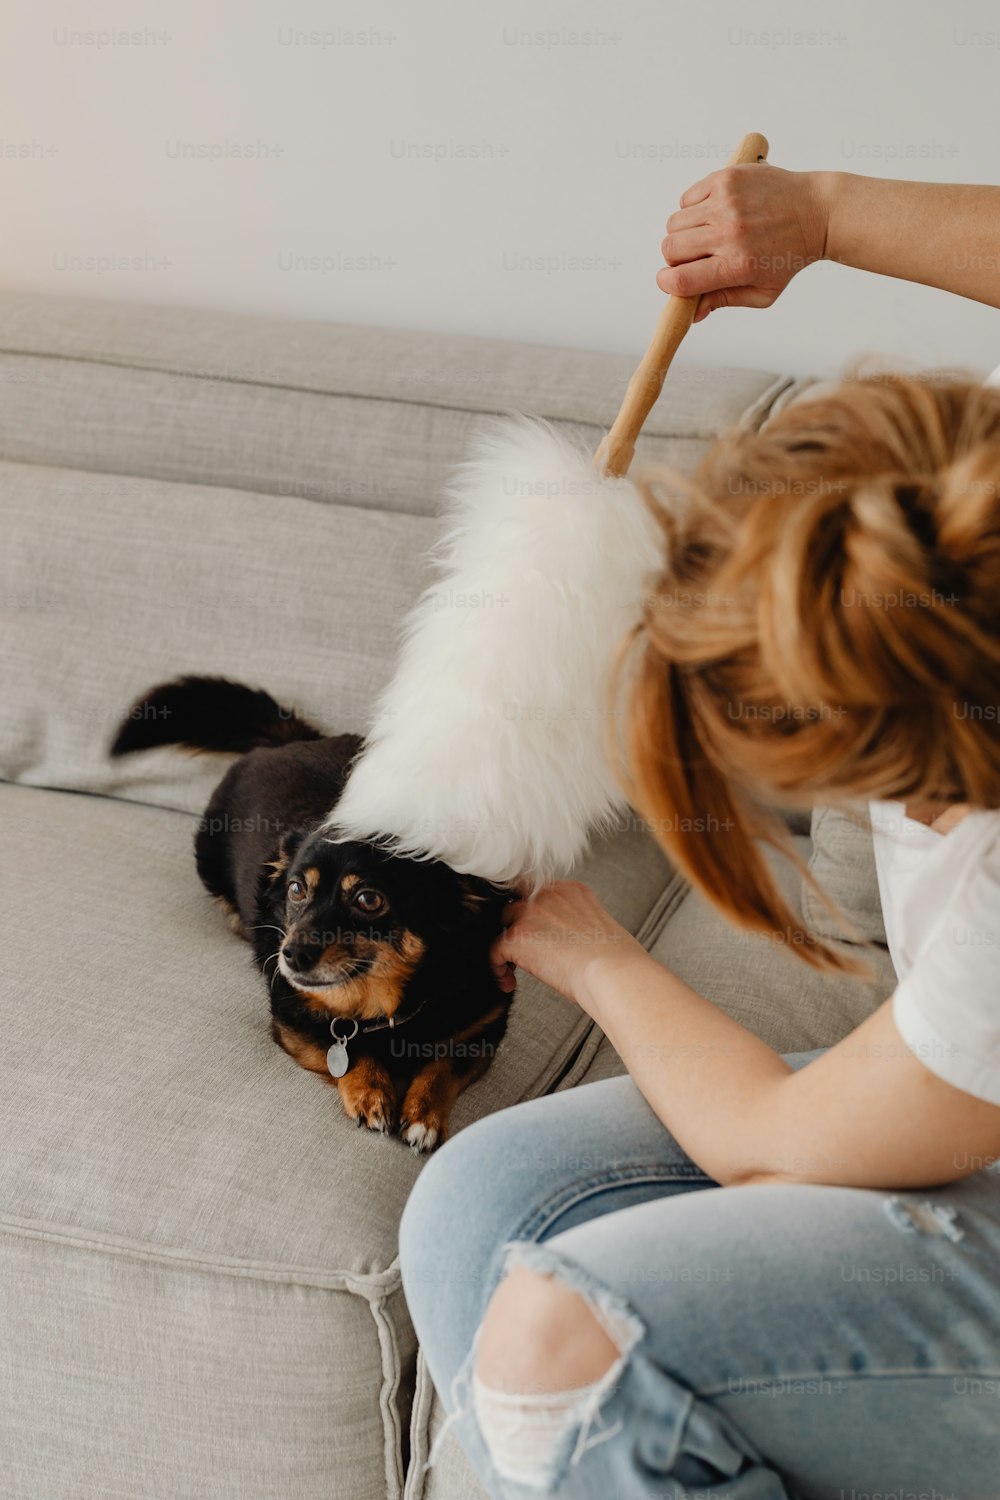 a woman sitting on a couch petting a dog